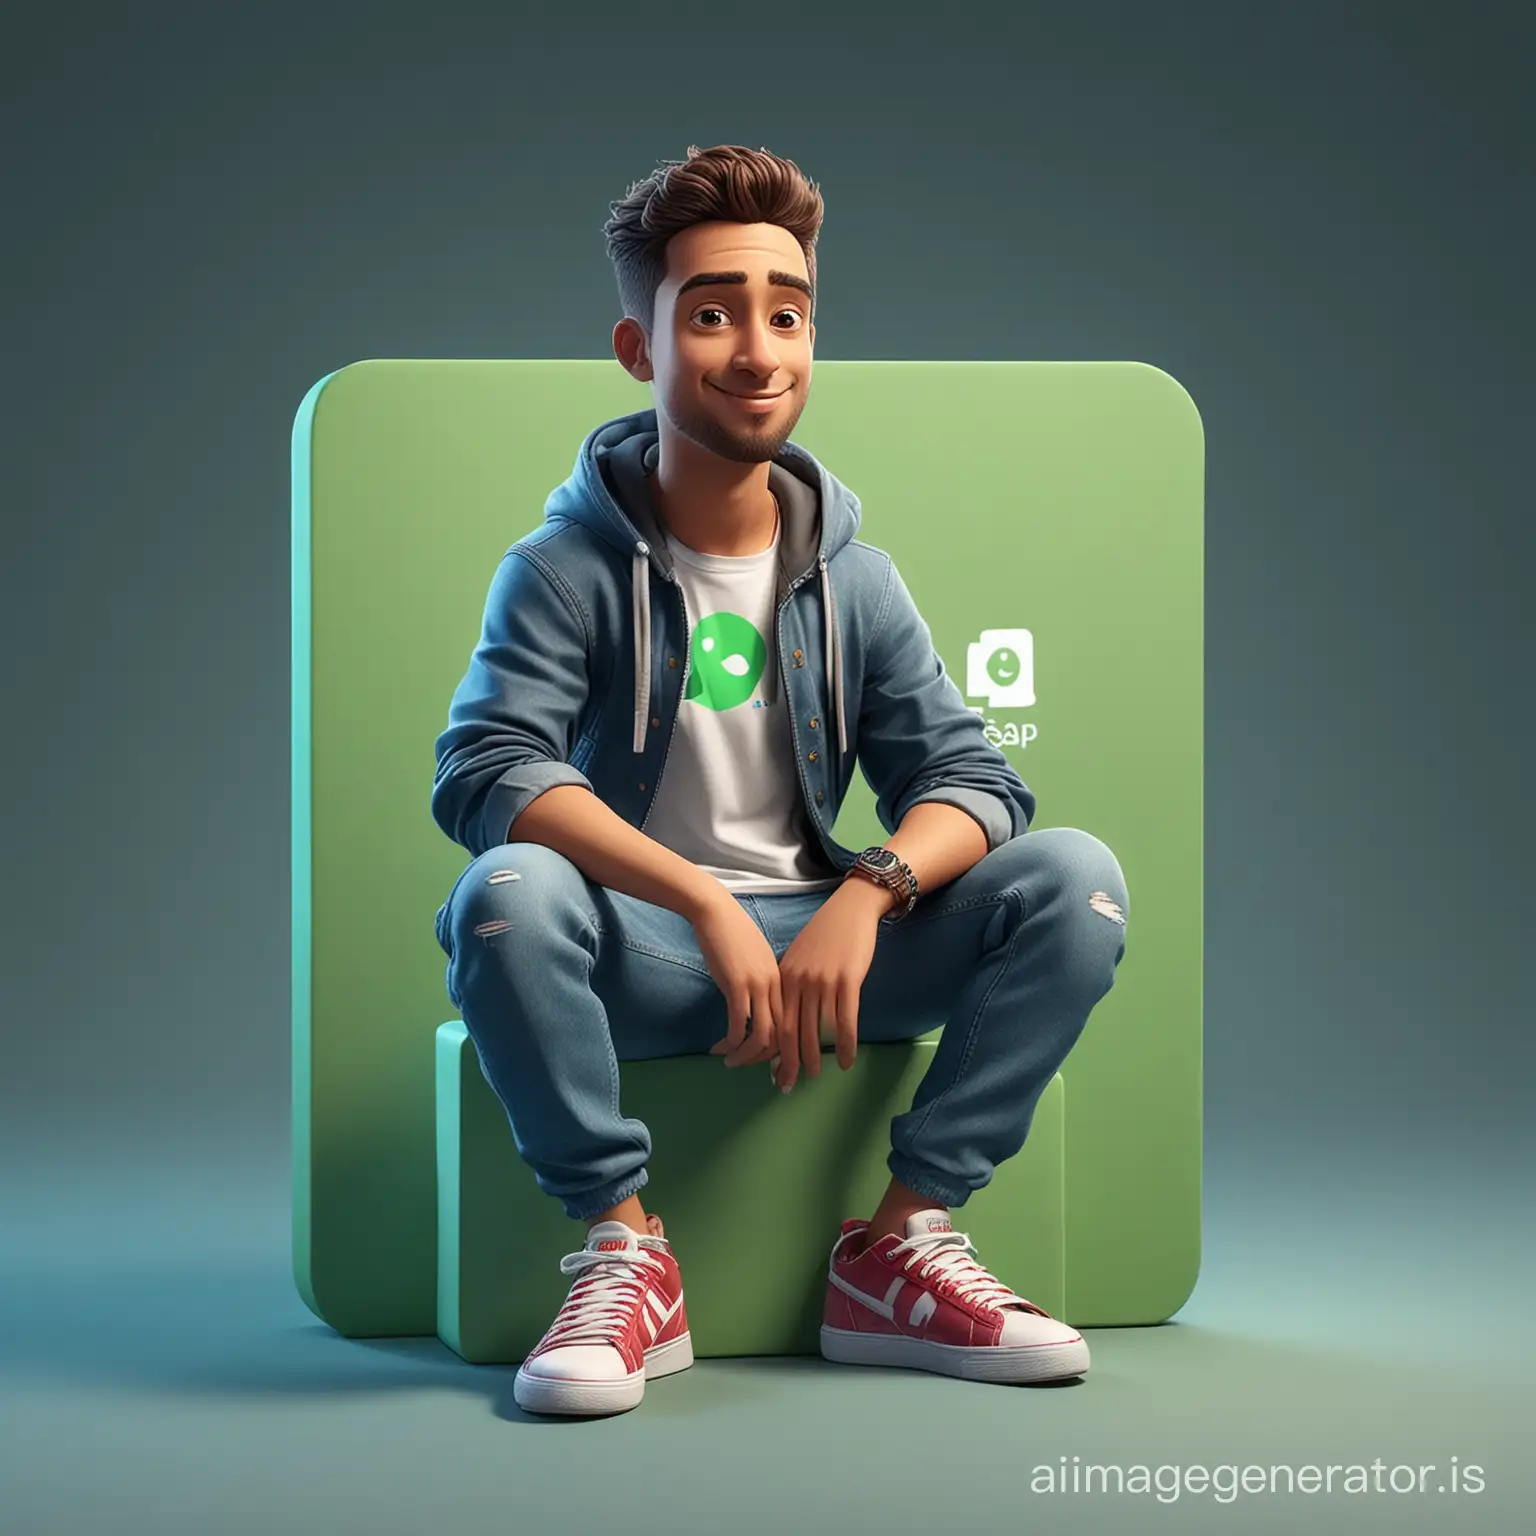 Create a 3D illustration of an animated character sitting casually on top of a social media logo "WhatsApp". The character must wear casual modern clothing such as jeans jacket and sneakers shoes. The background of the image is a social media profile page with a user name "Zubair" and a profile picture that match.